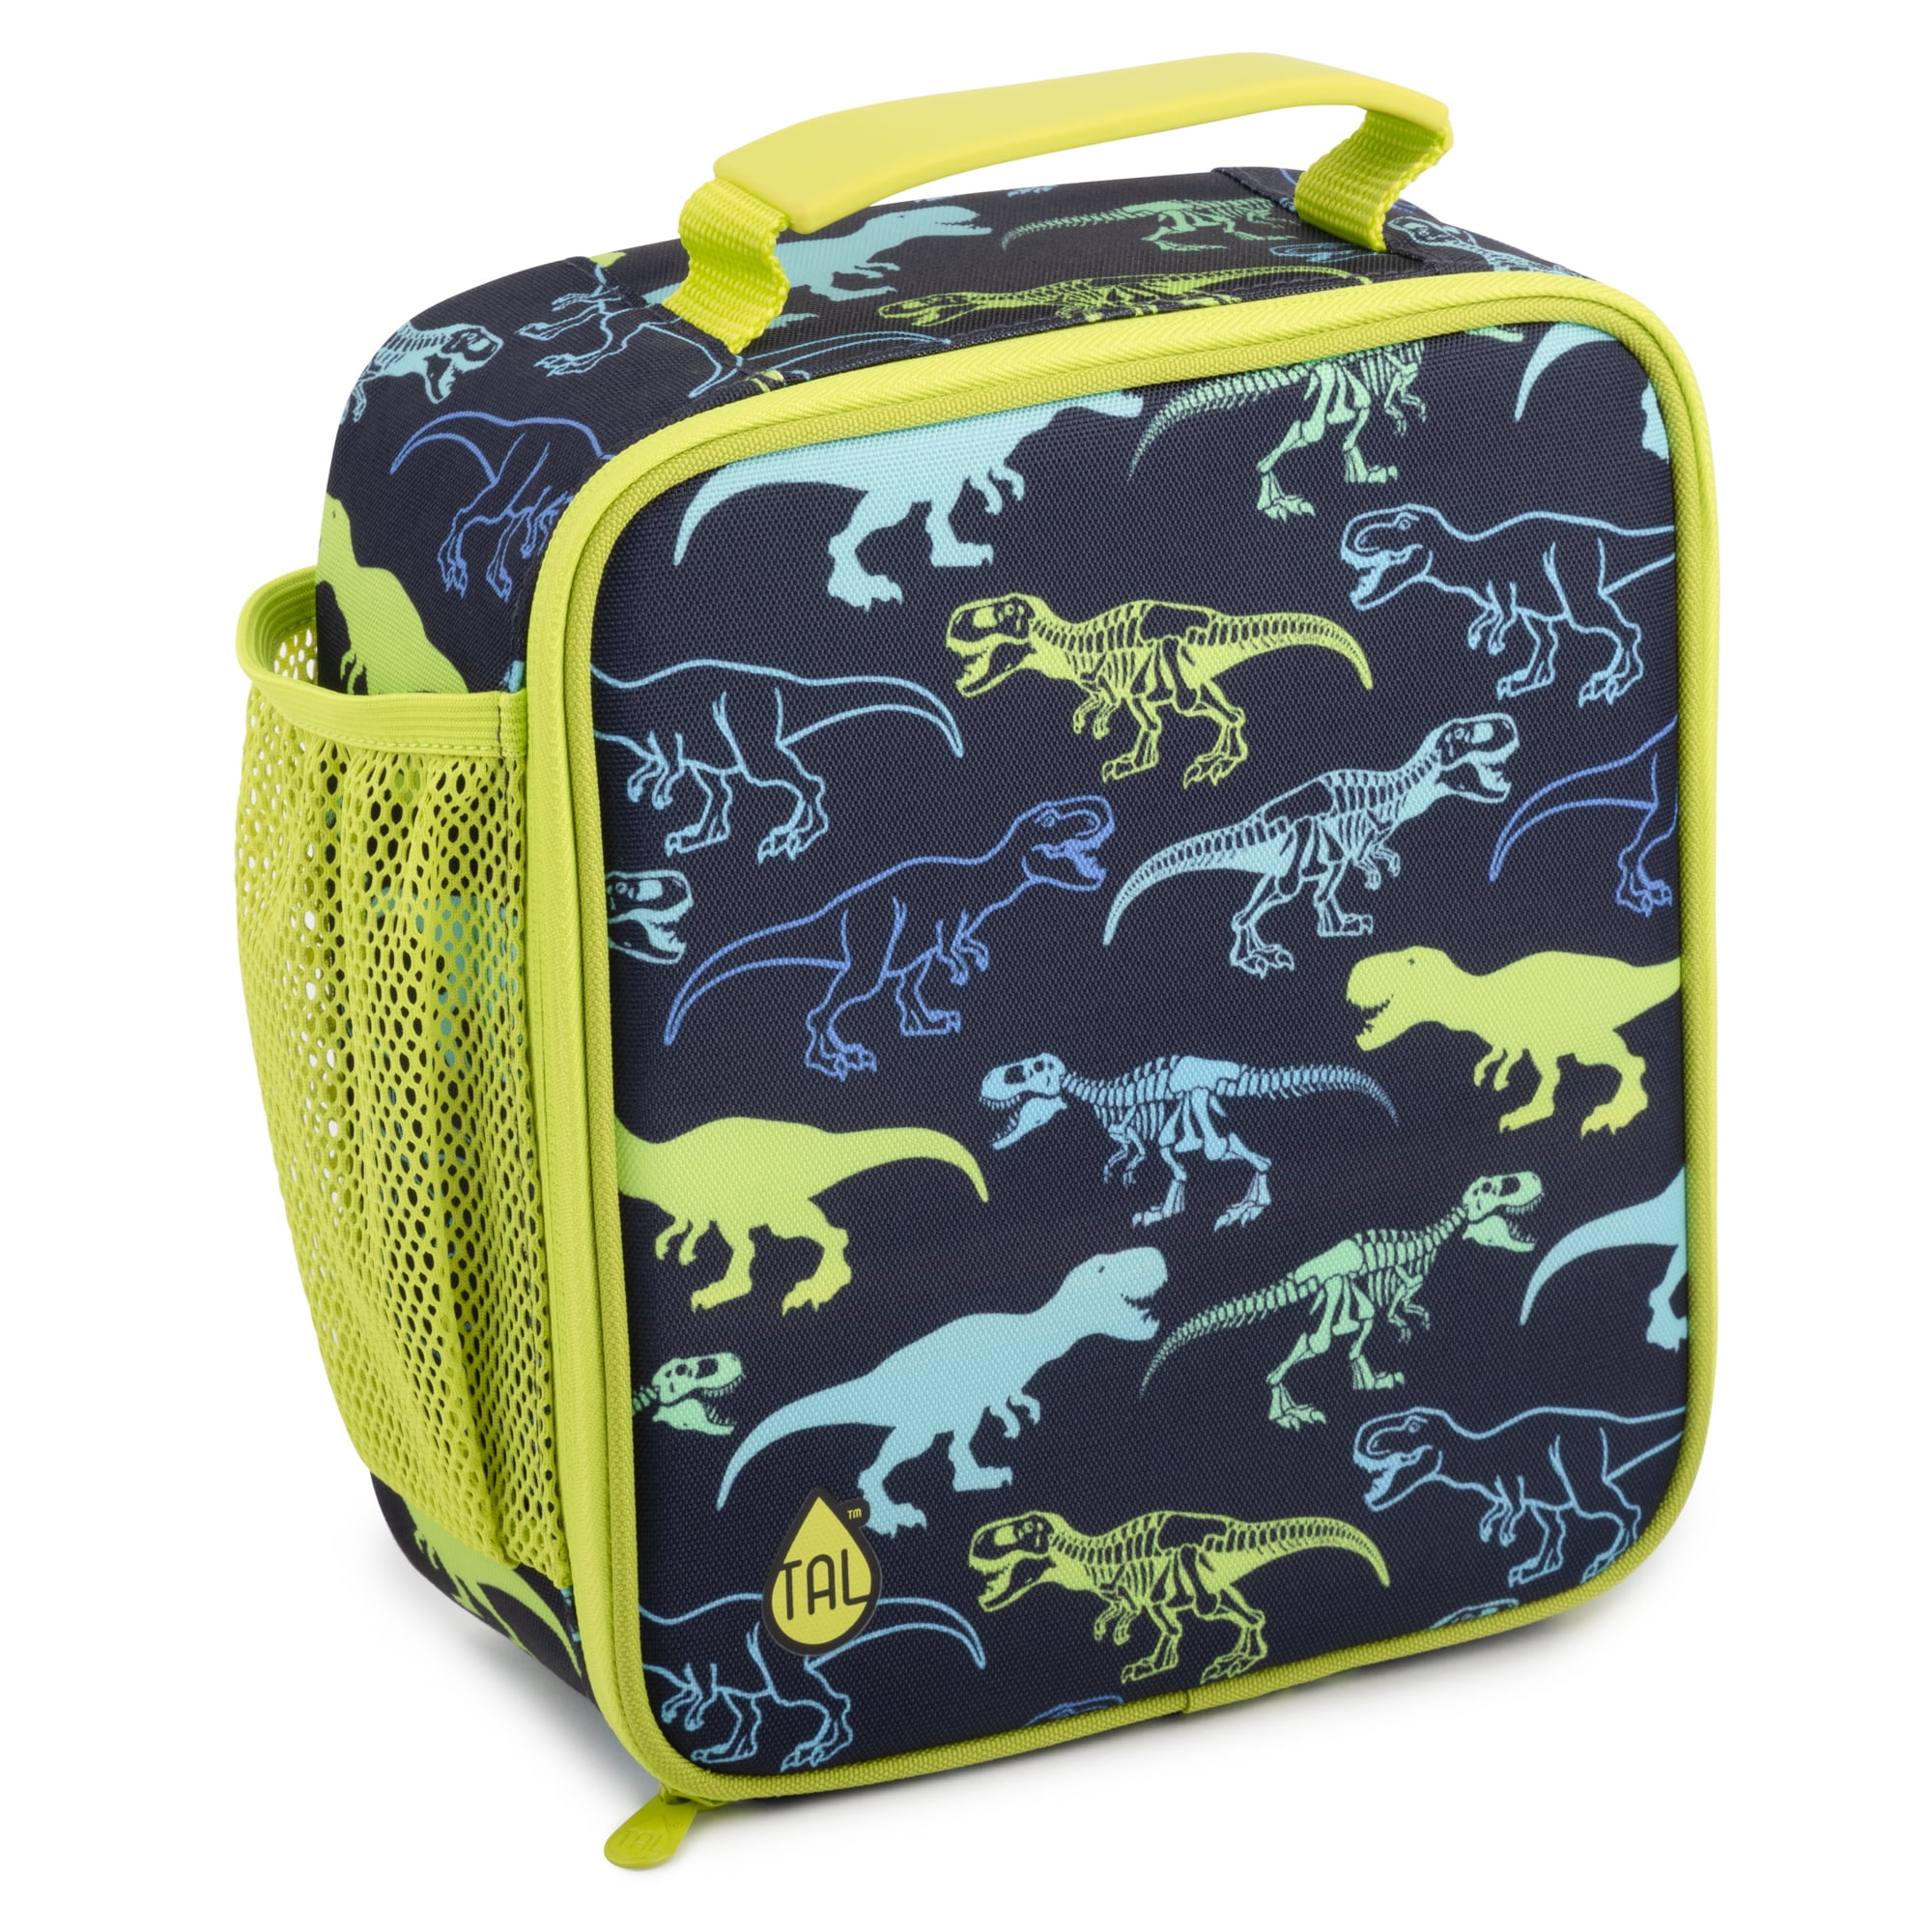 TAL Kids Insulated Reusable Soft Lunch Bag, Dinosaurs